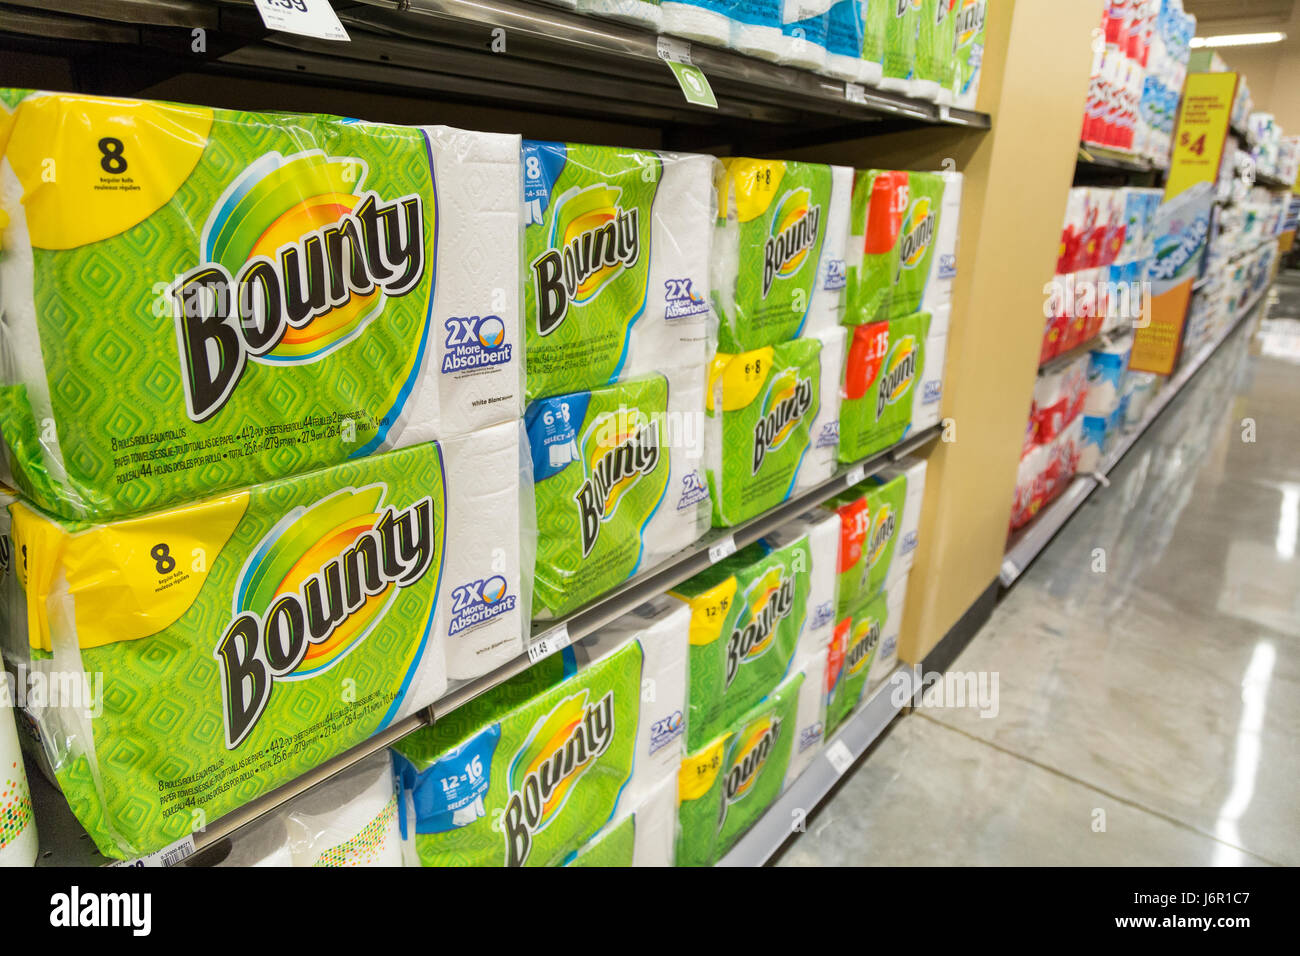 packages of Bounty brand paper towels stacked on grocery store shelves Stock Photo